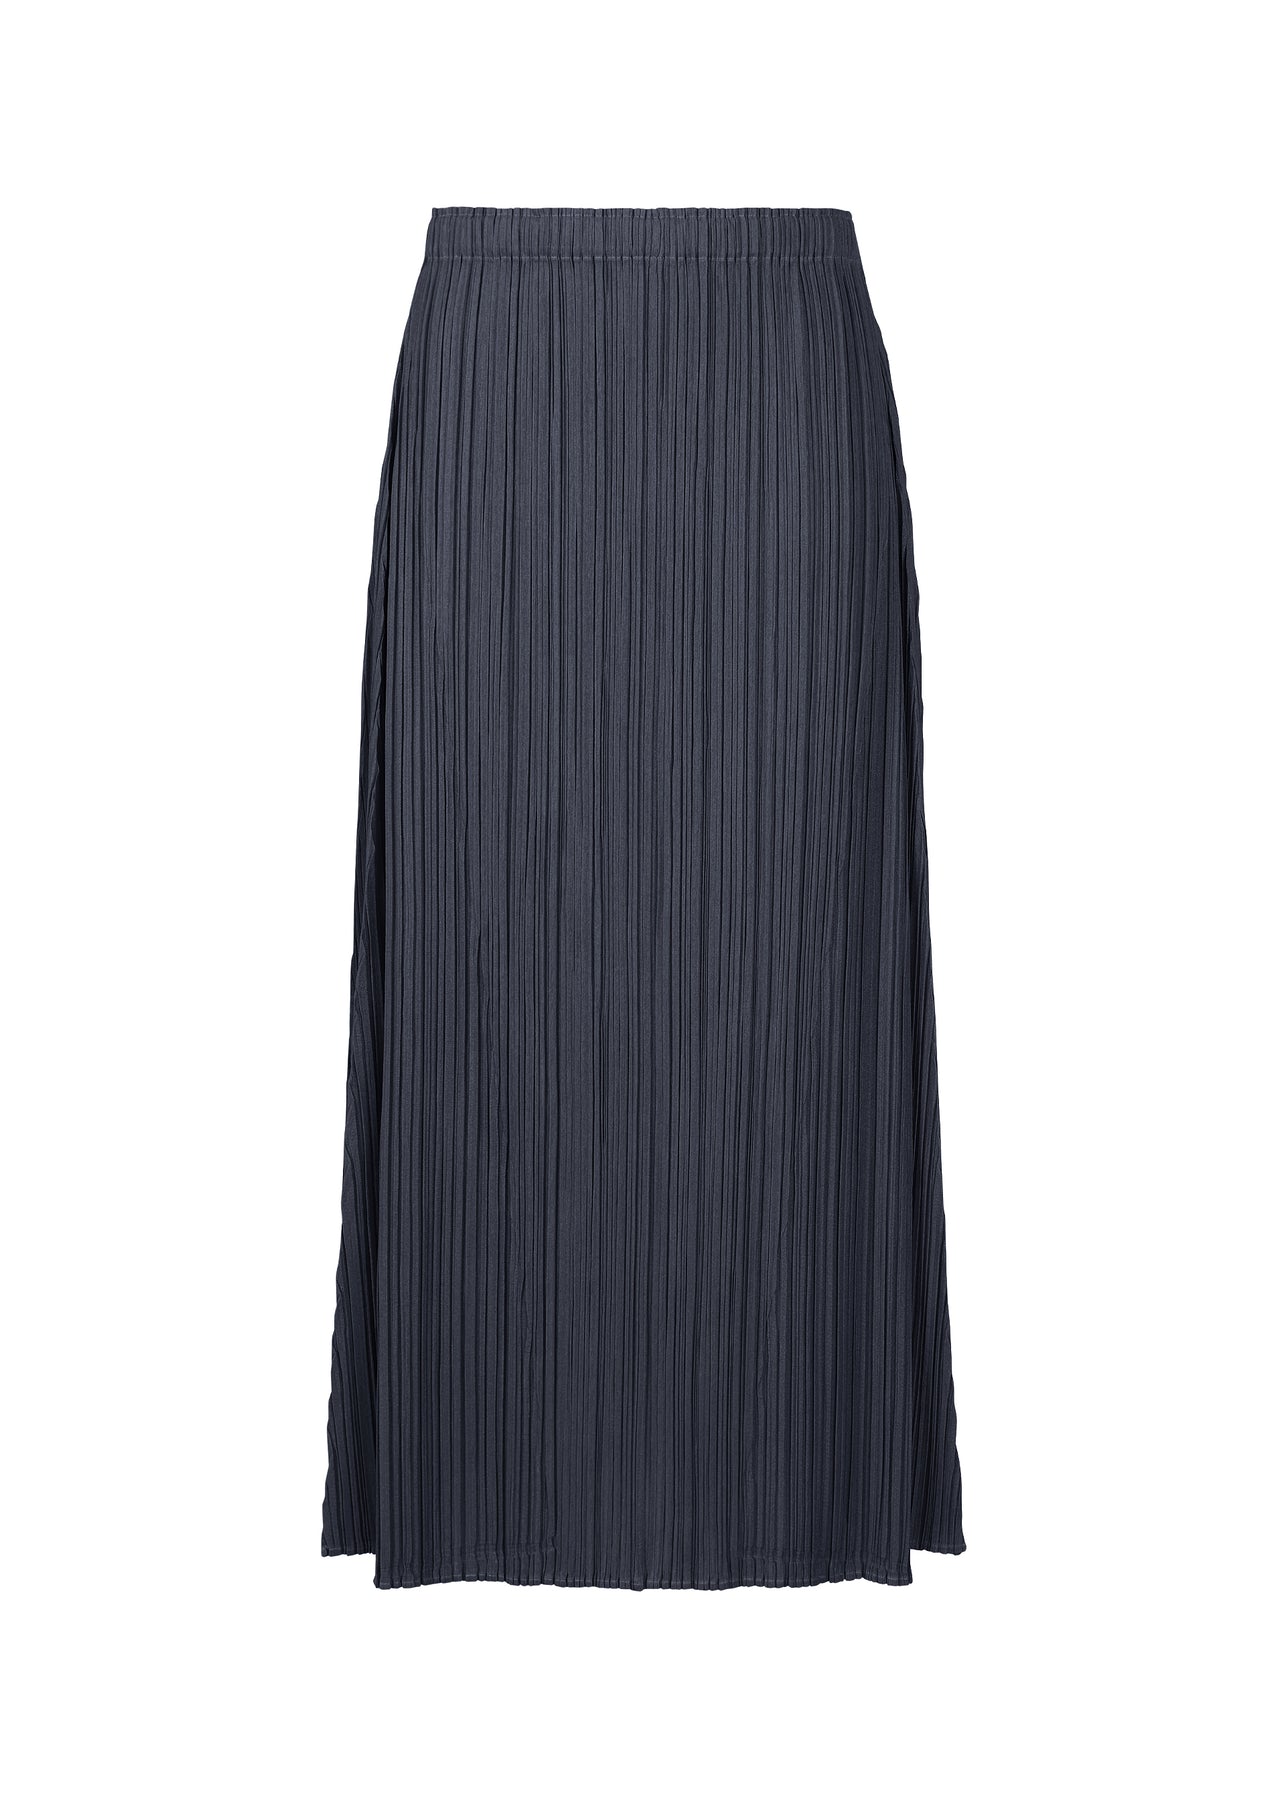 MELLOW PLEATS SKIRT | The official ISSEY MIYAKE ONLINE STORE